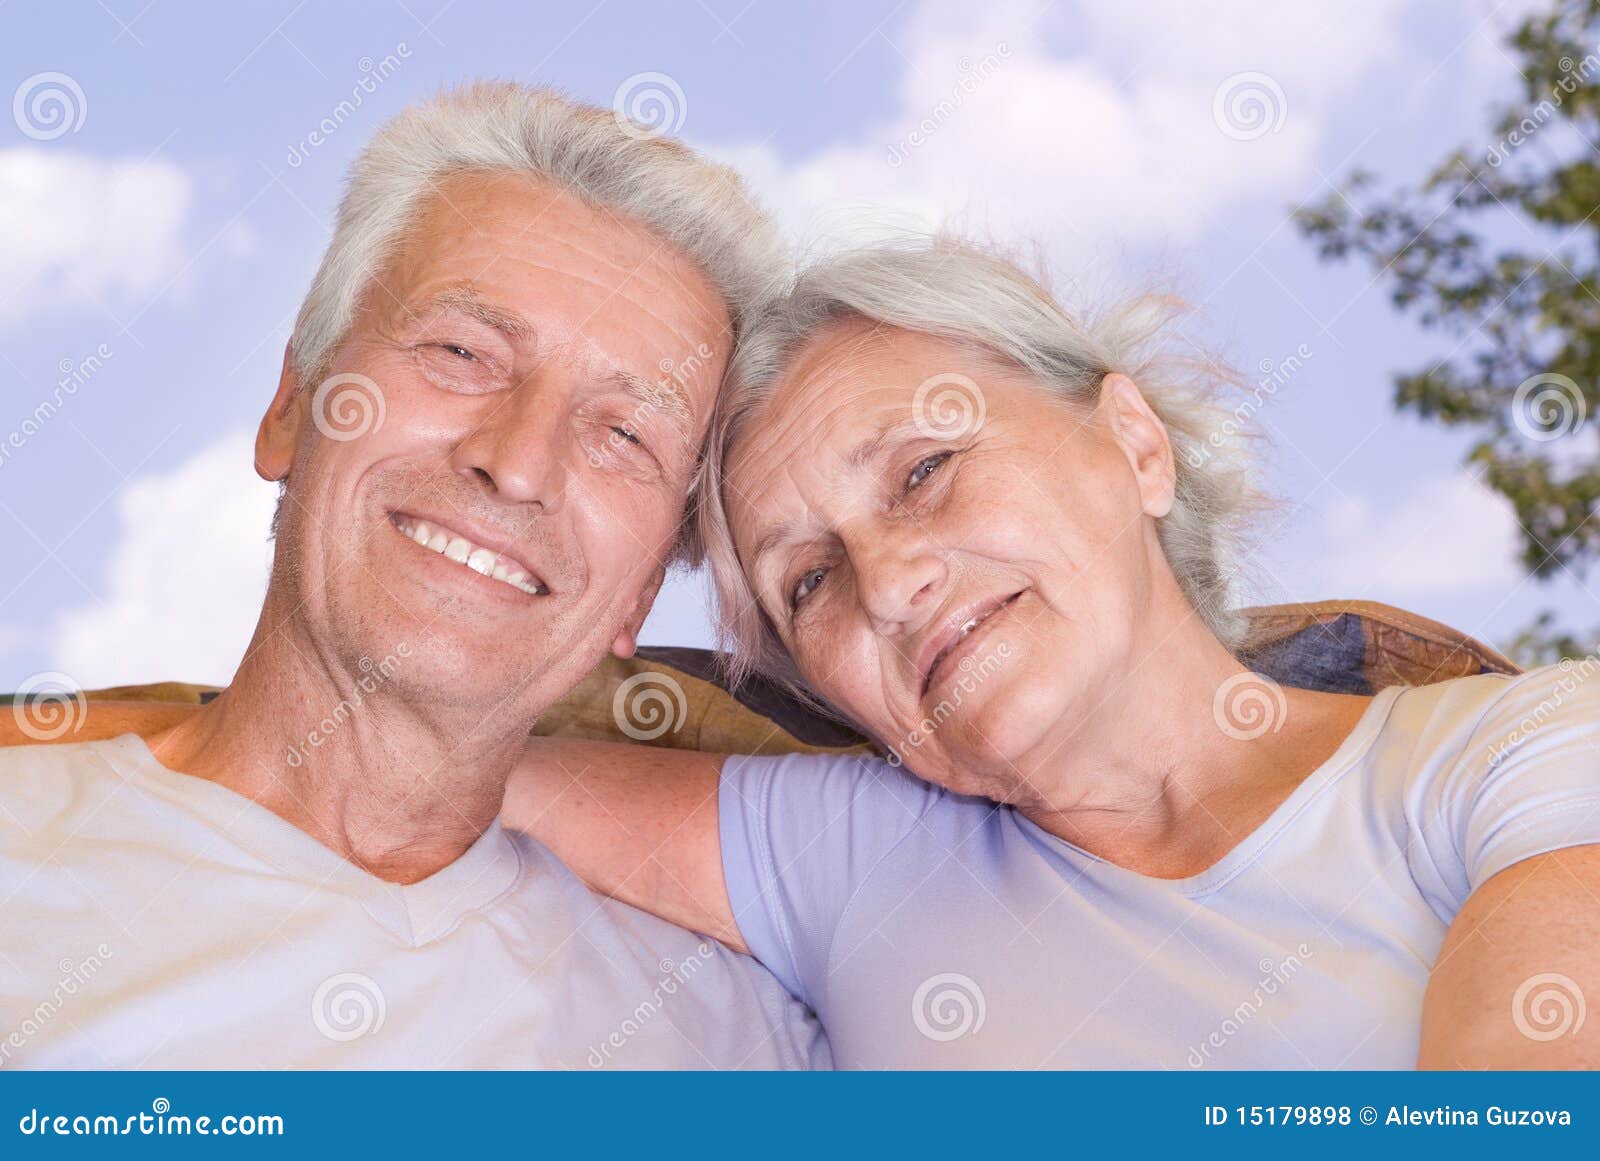 Old Couple Dancing Stock Photos, Pictures & Royalty-Free 